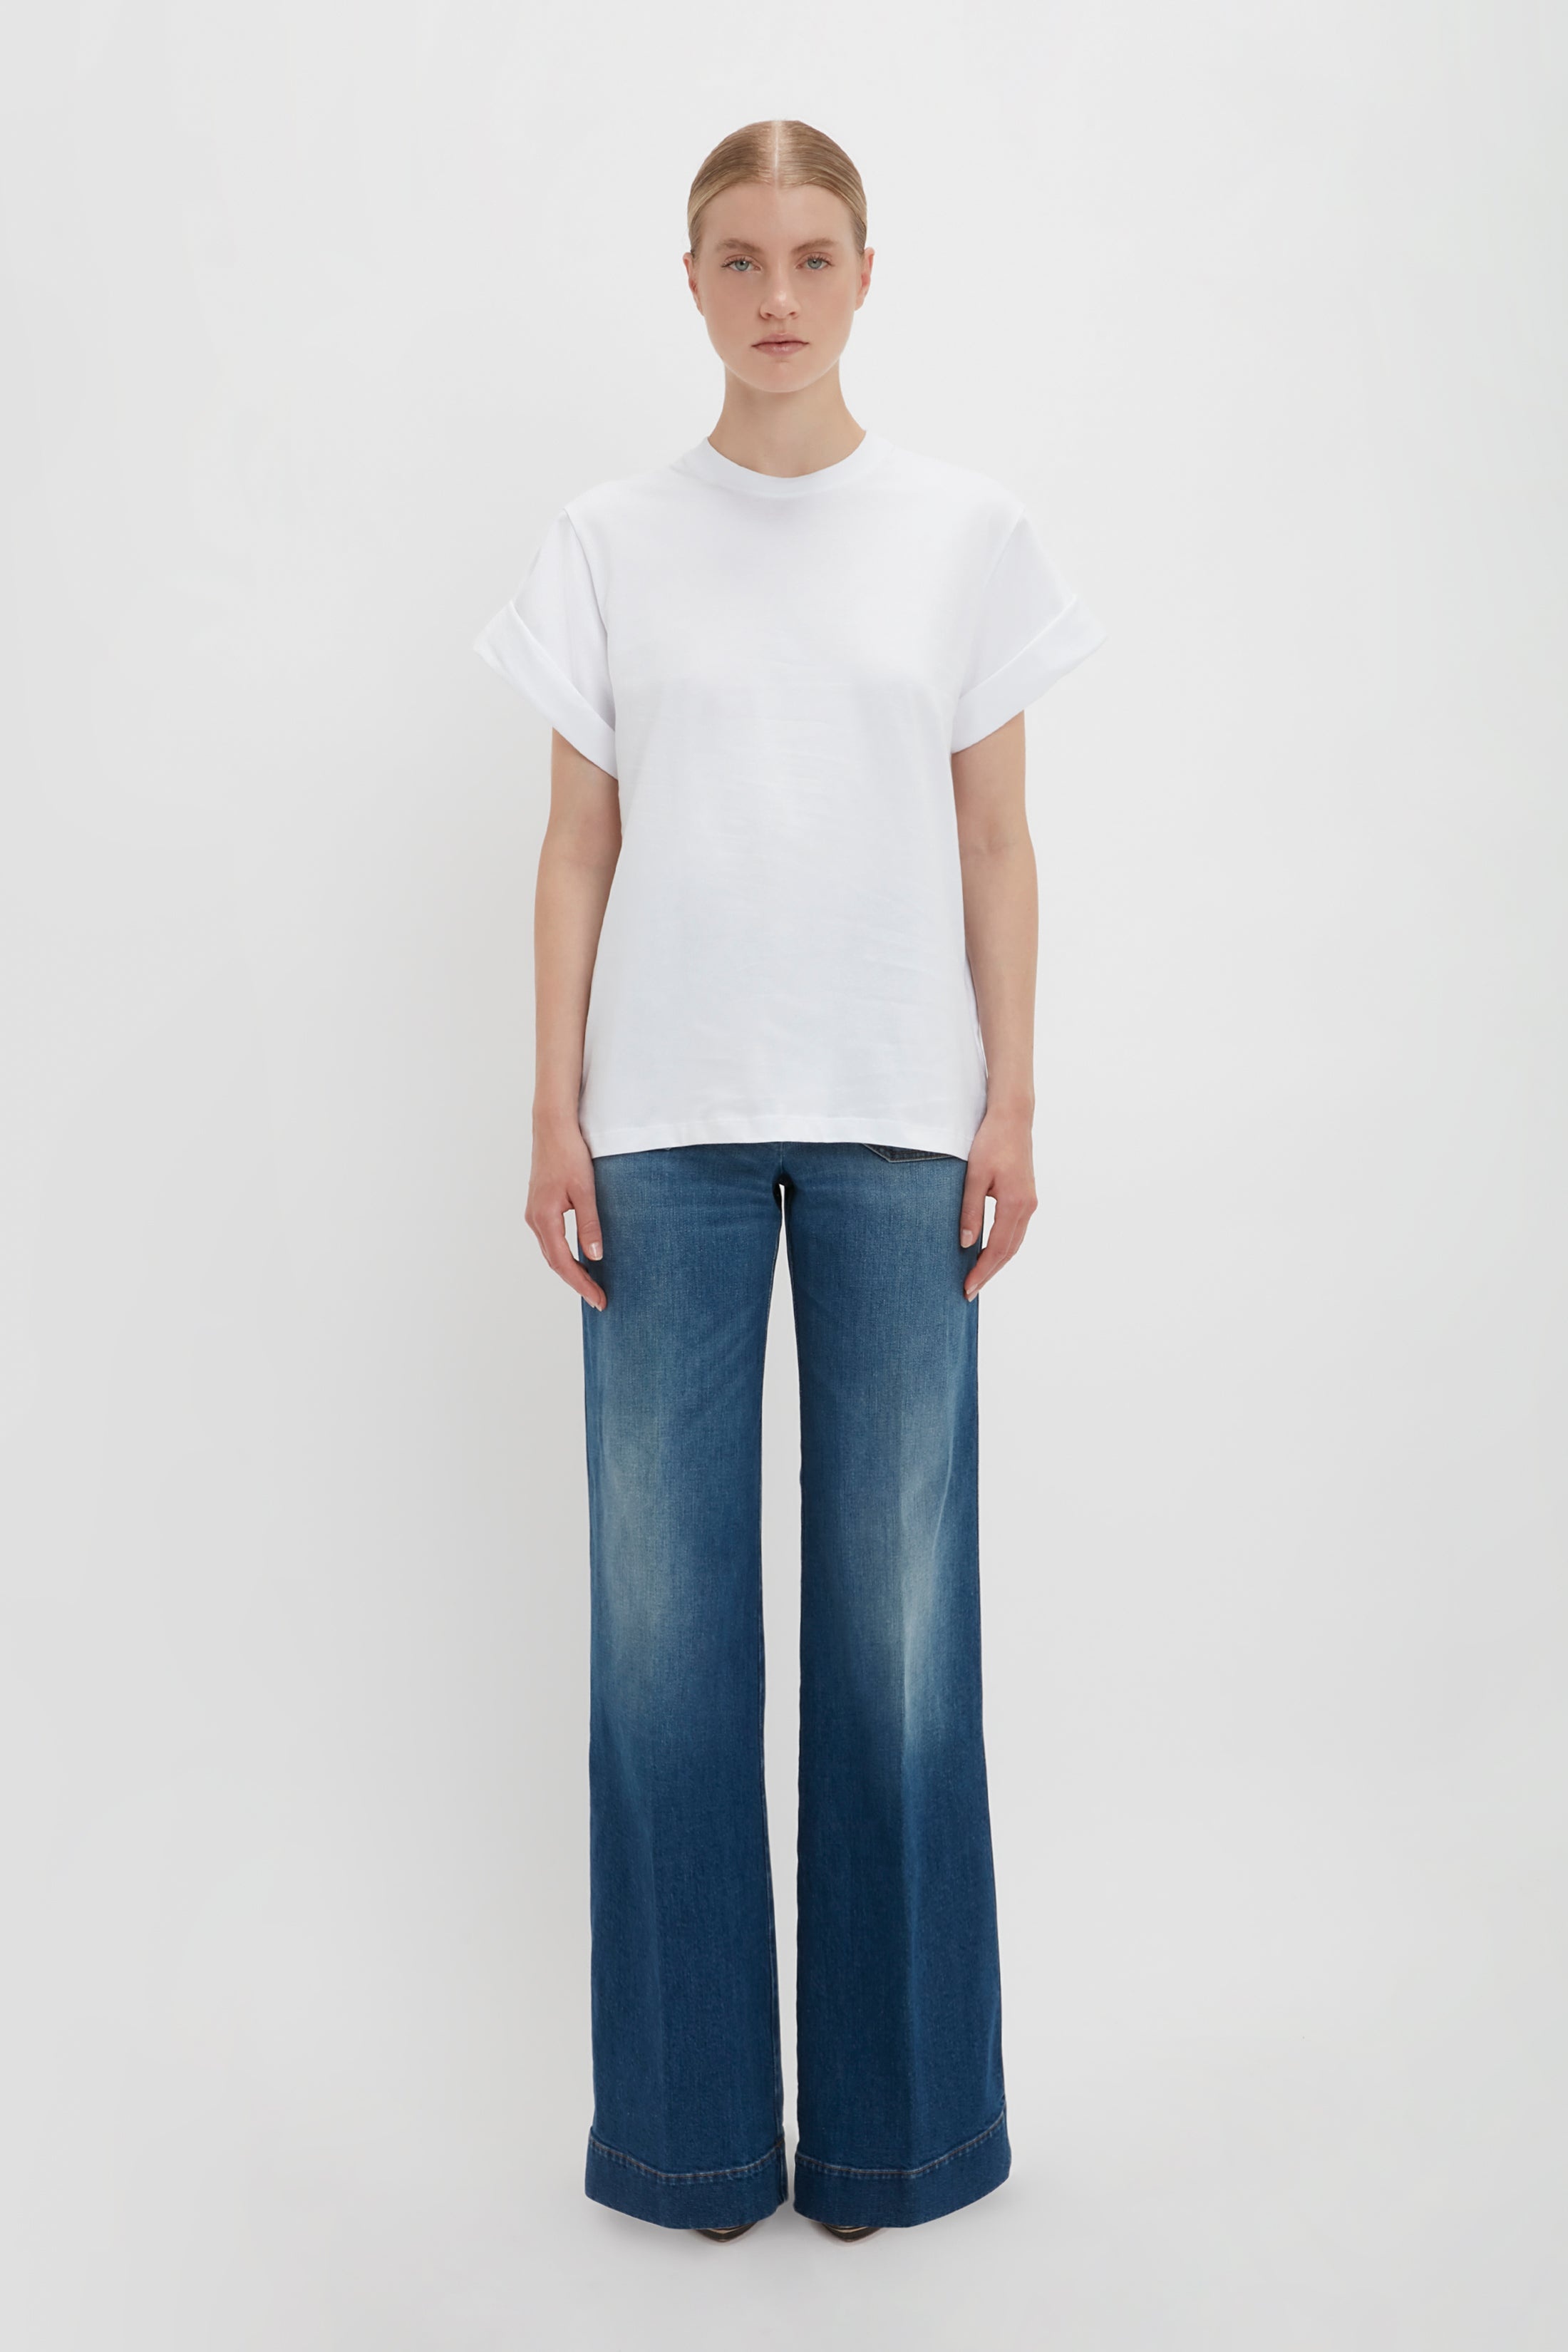 Asymmetric Relaxed Fit T-Shirt In White - 2